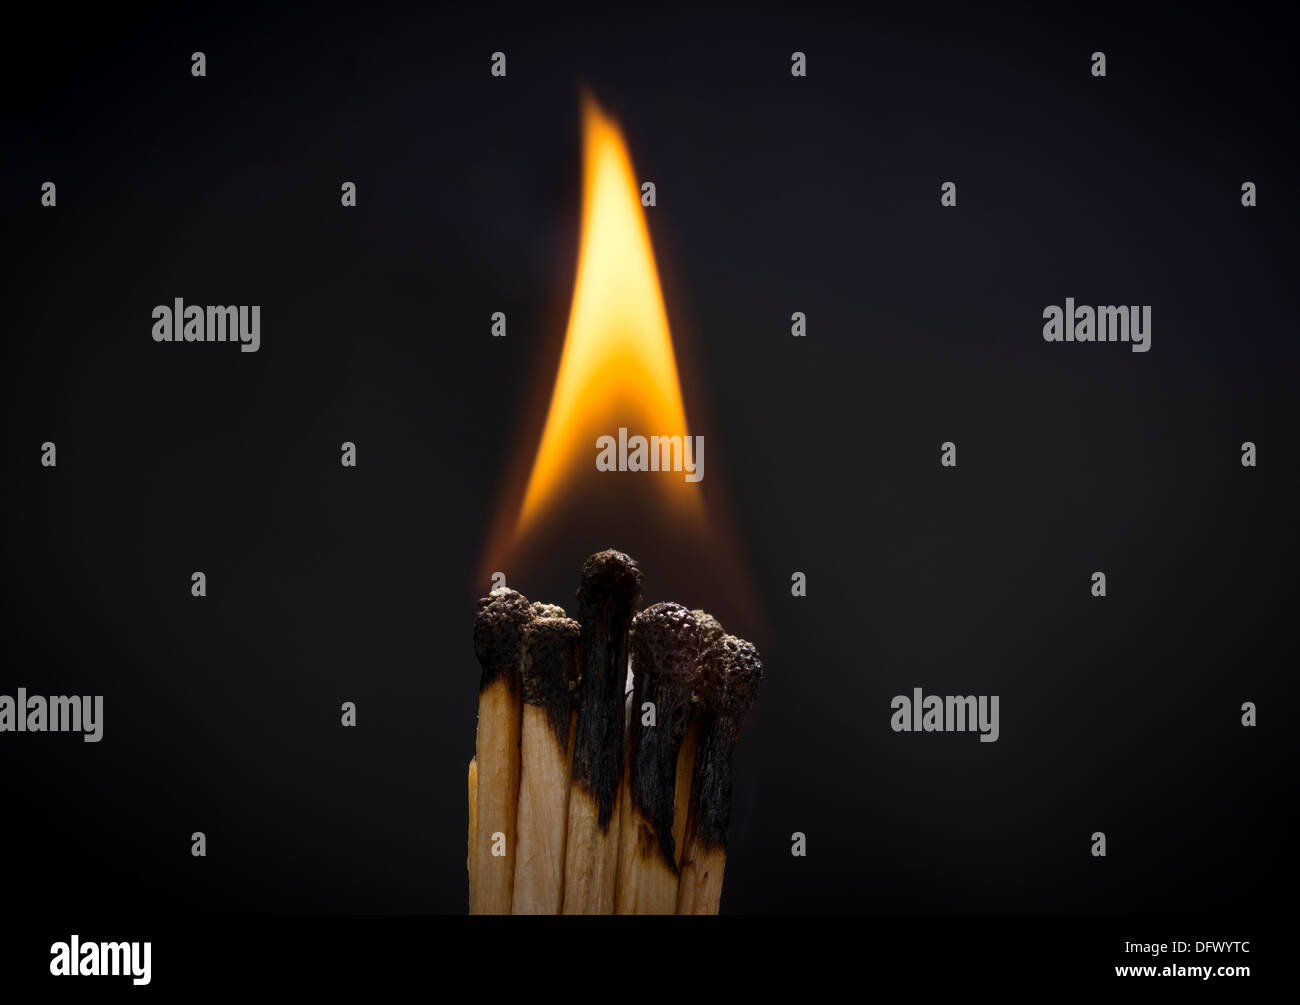 Concept photo showing burned out matches with flame illustrating the burned out business metaphor Stock Photo